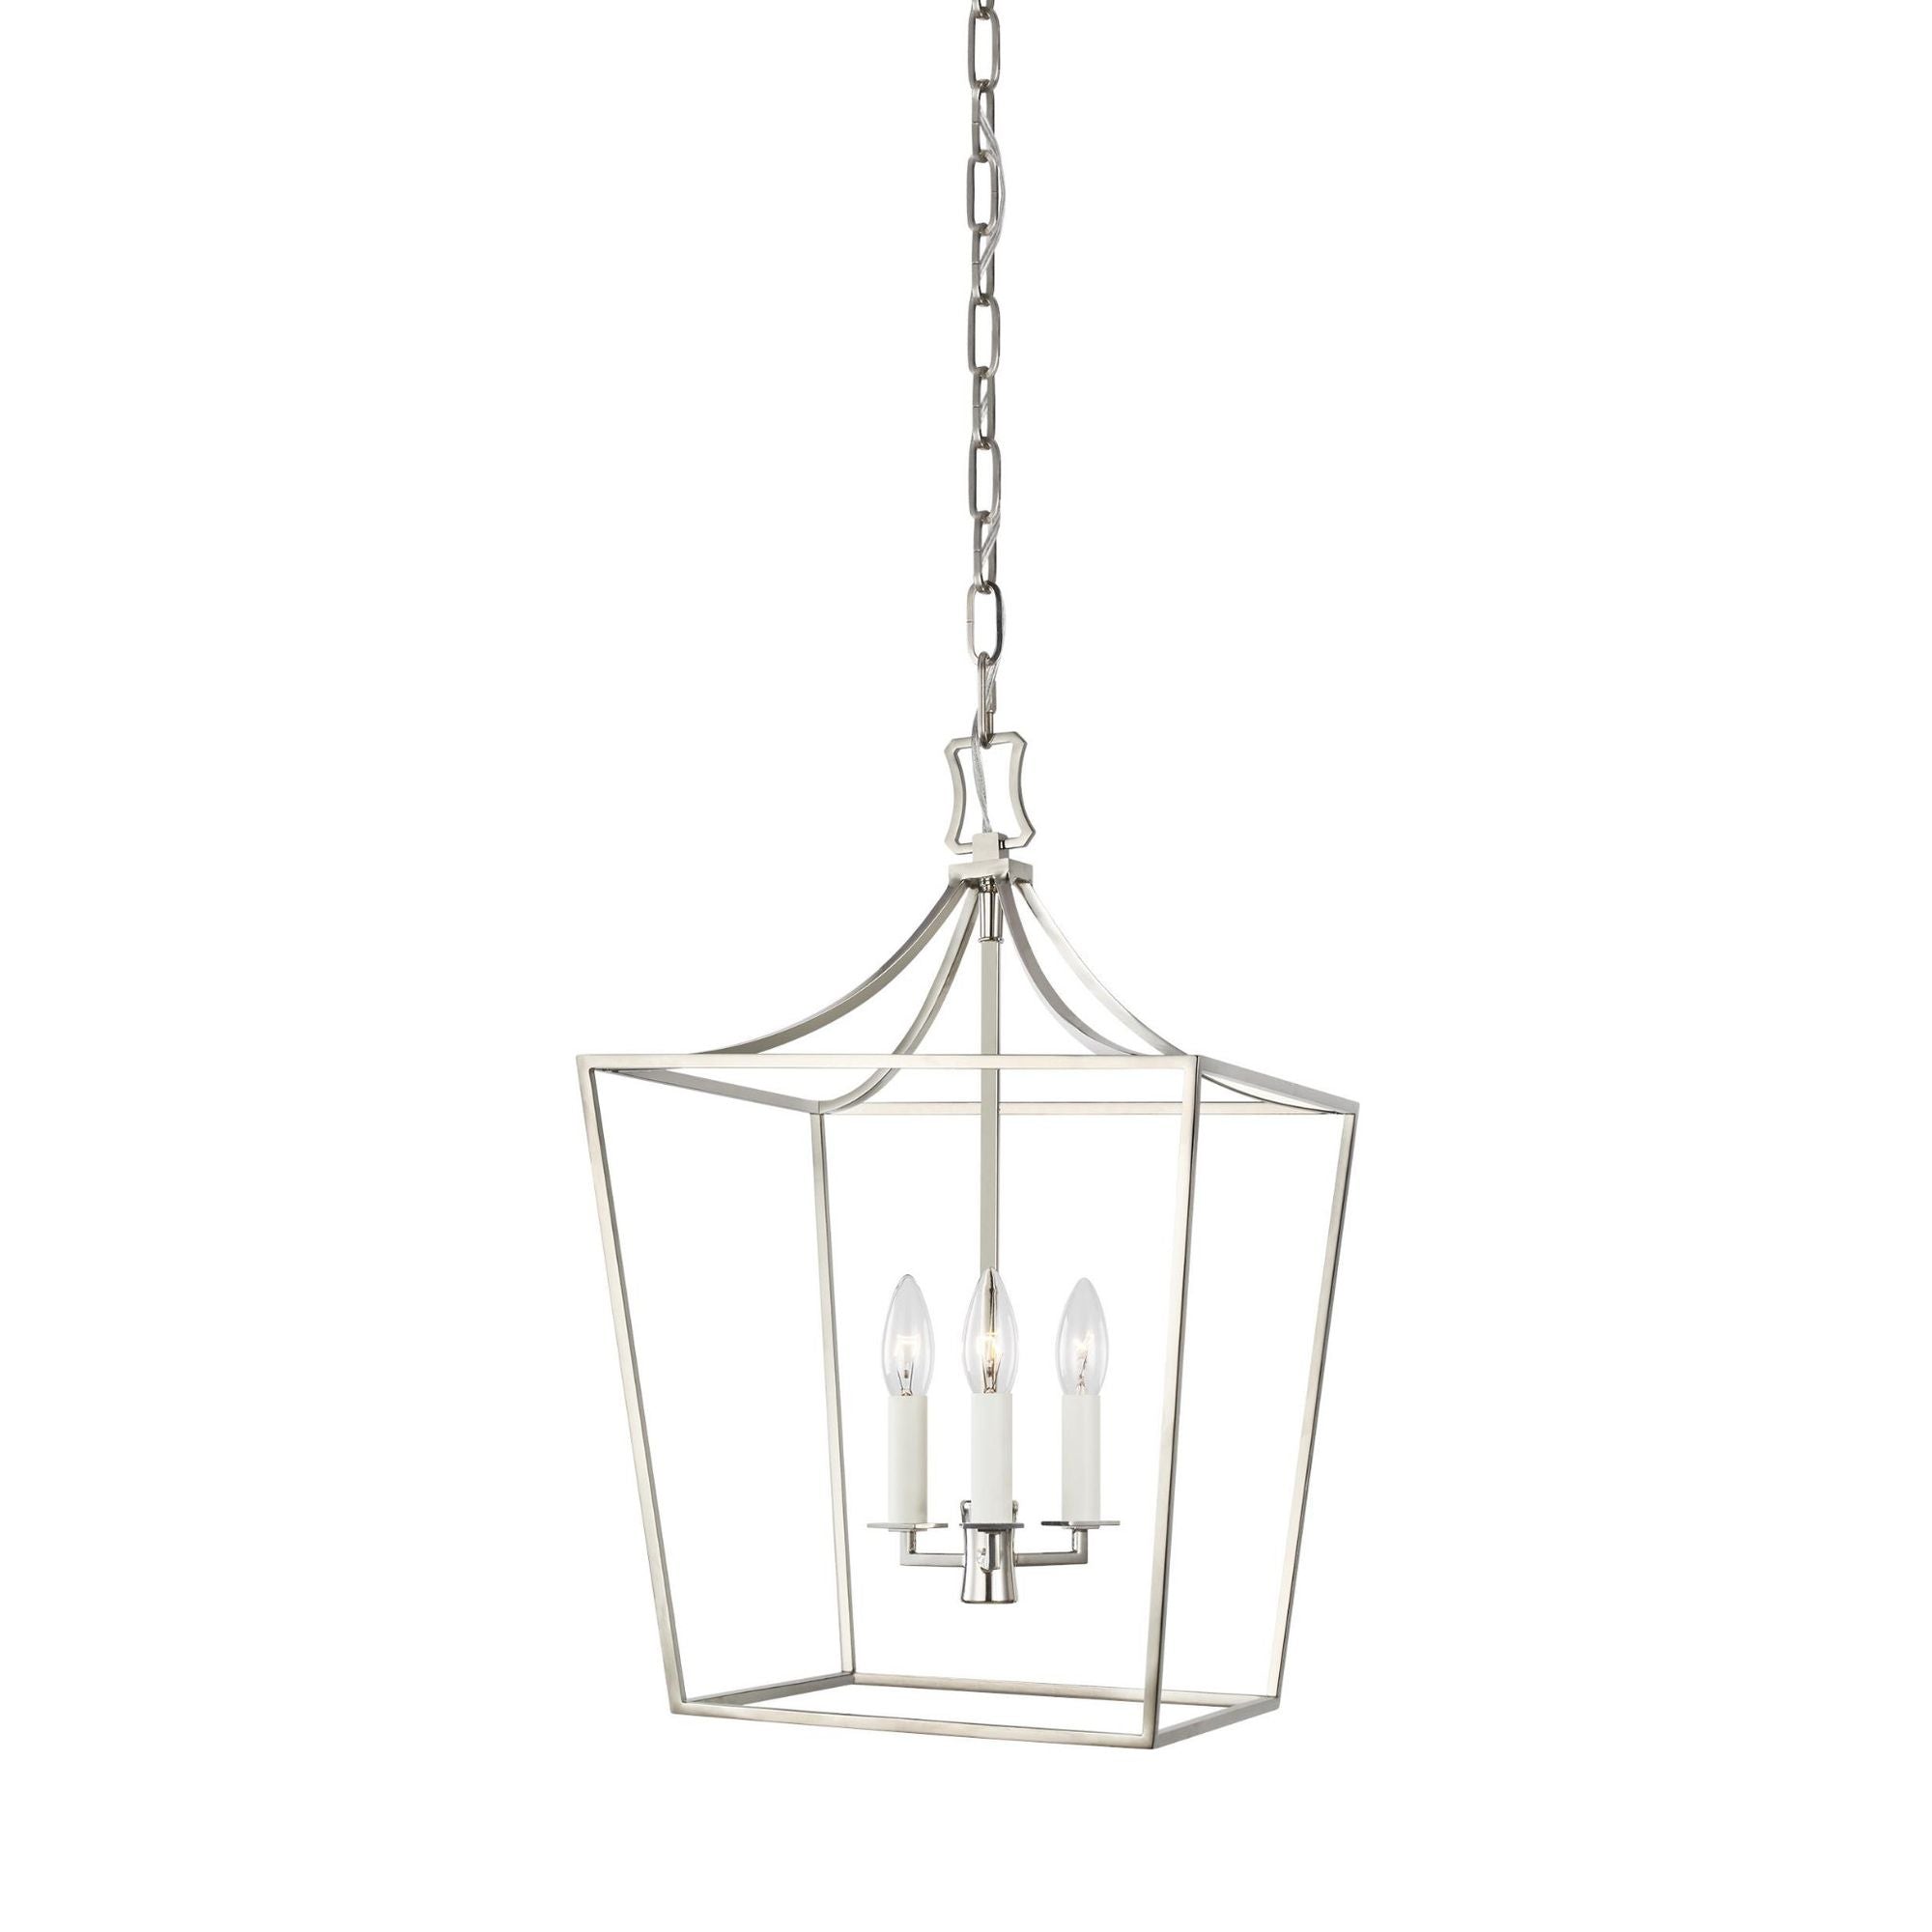 Chapman & Myers Southold Small Lantern in Polished Nickel